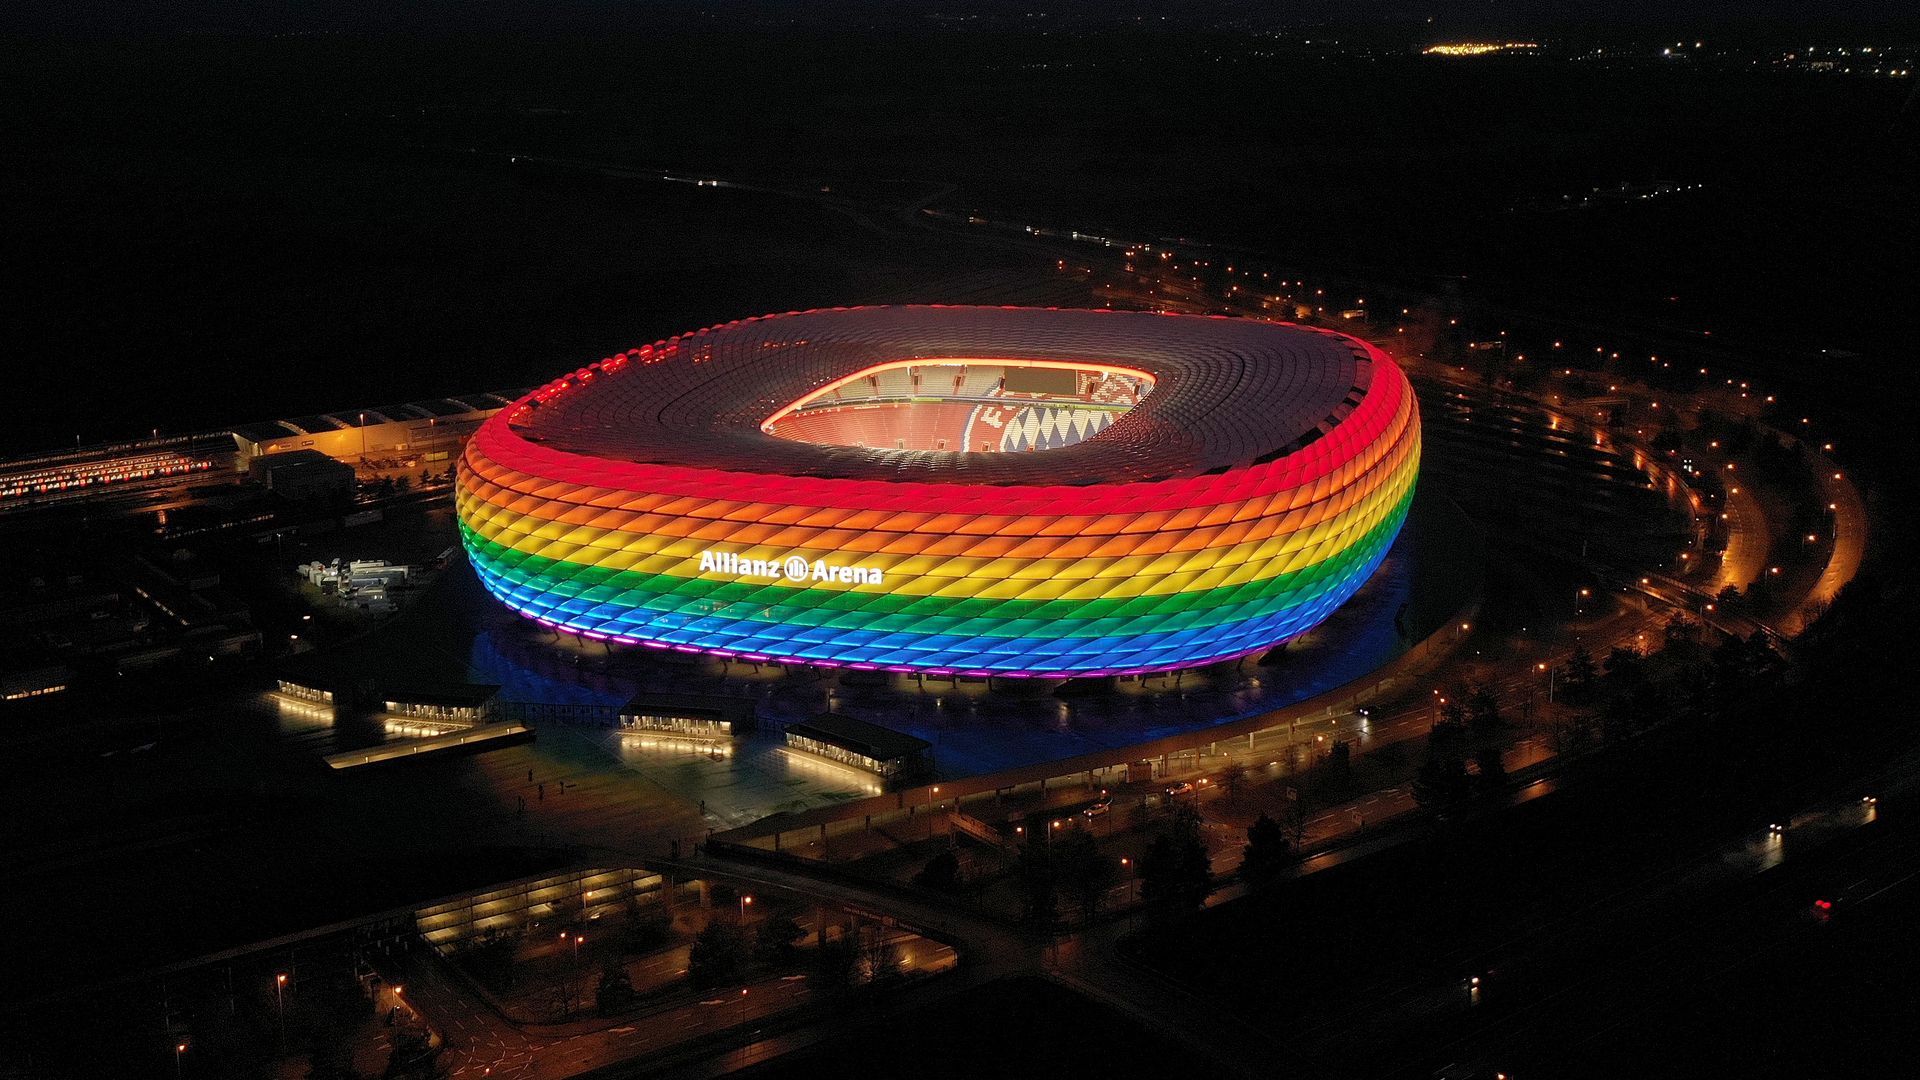 Bayern Munich disappointed by UEFA's decision to ban the rainbow flag from  Germany vs. Hungary - Bavarian Football Works